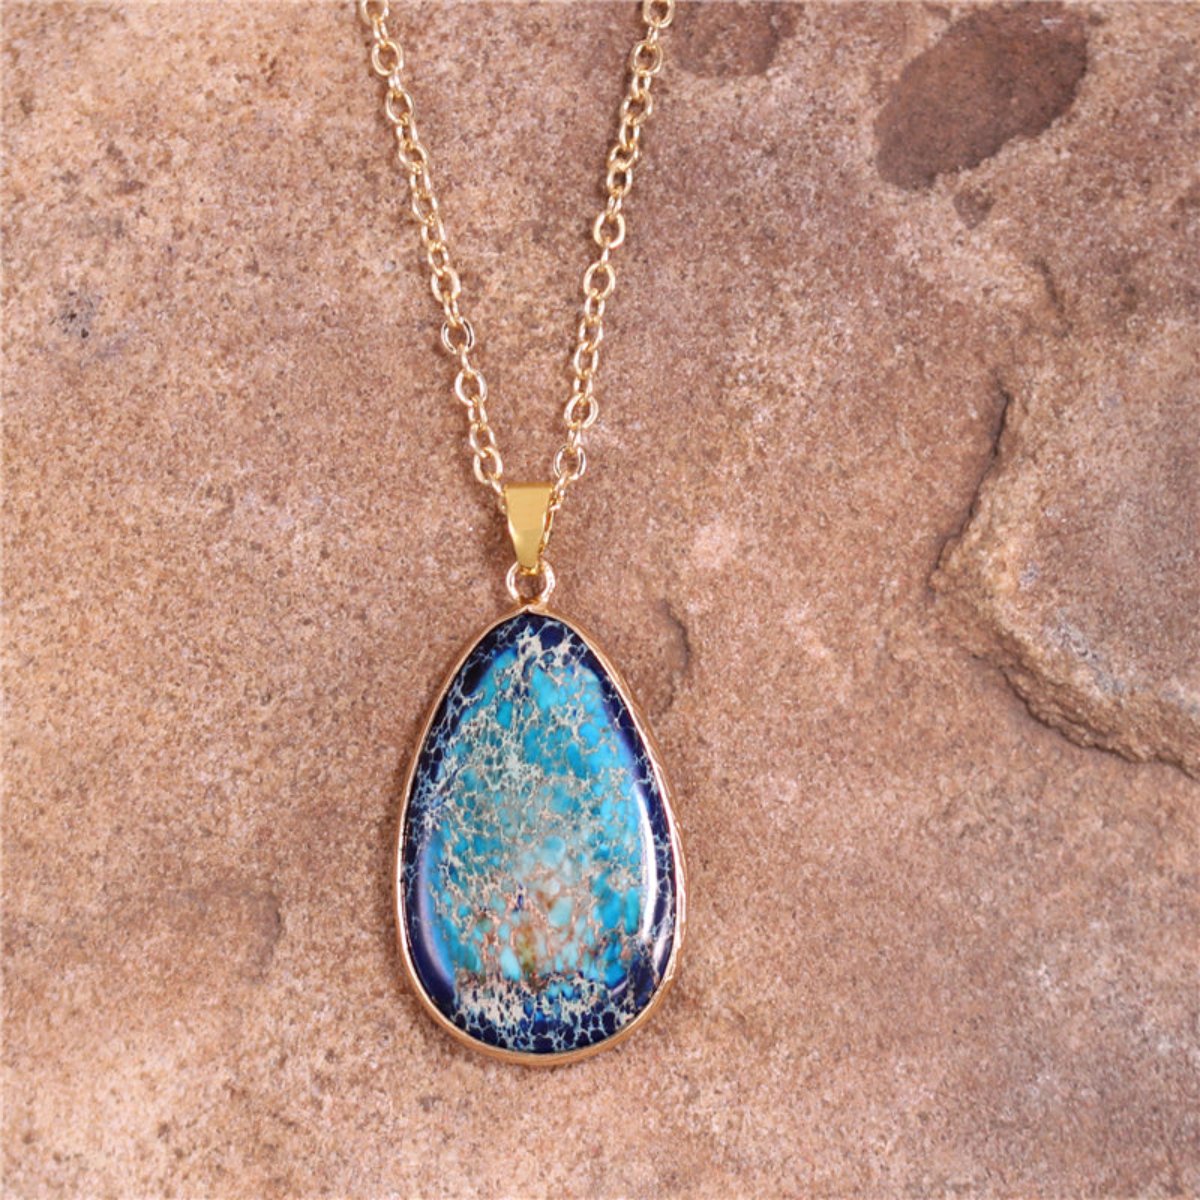 Modern Imperial Jaspers Gold Chain Teardrop Necklace - Blue Imperial Jaspers - Necklaces - Pretland | Spiritual Crystals & Jewelry